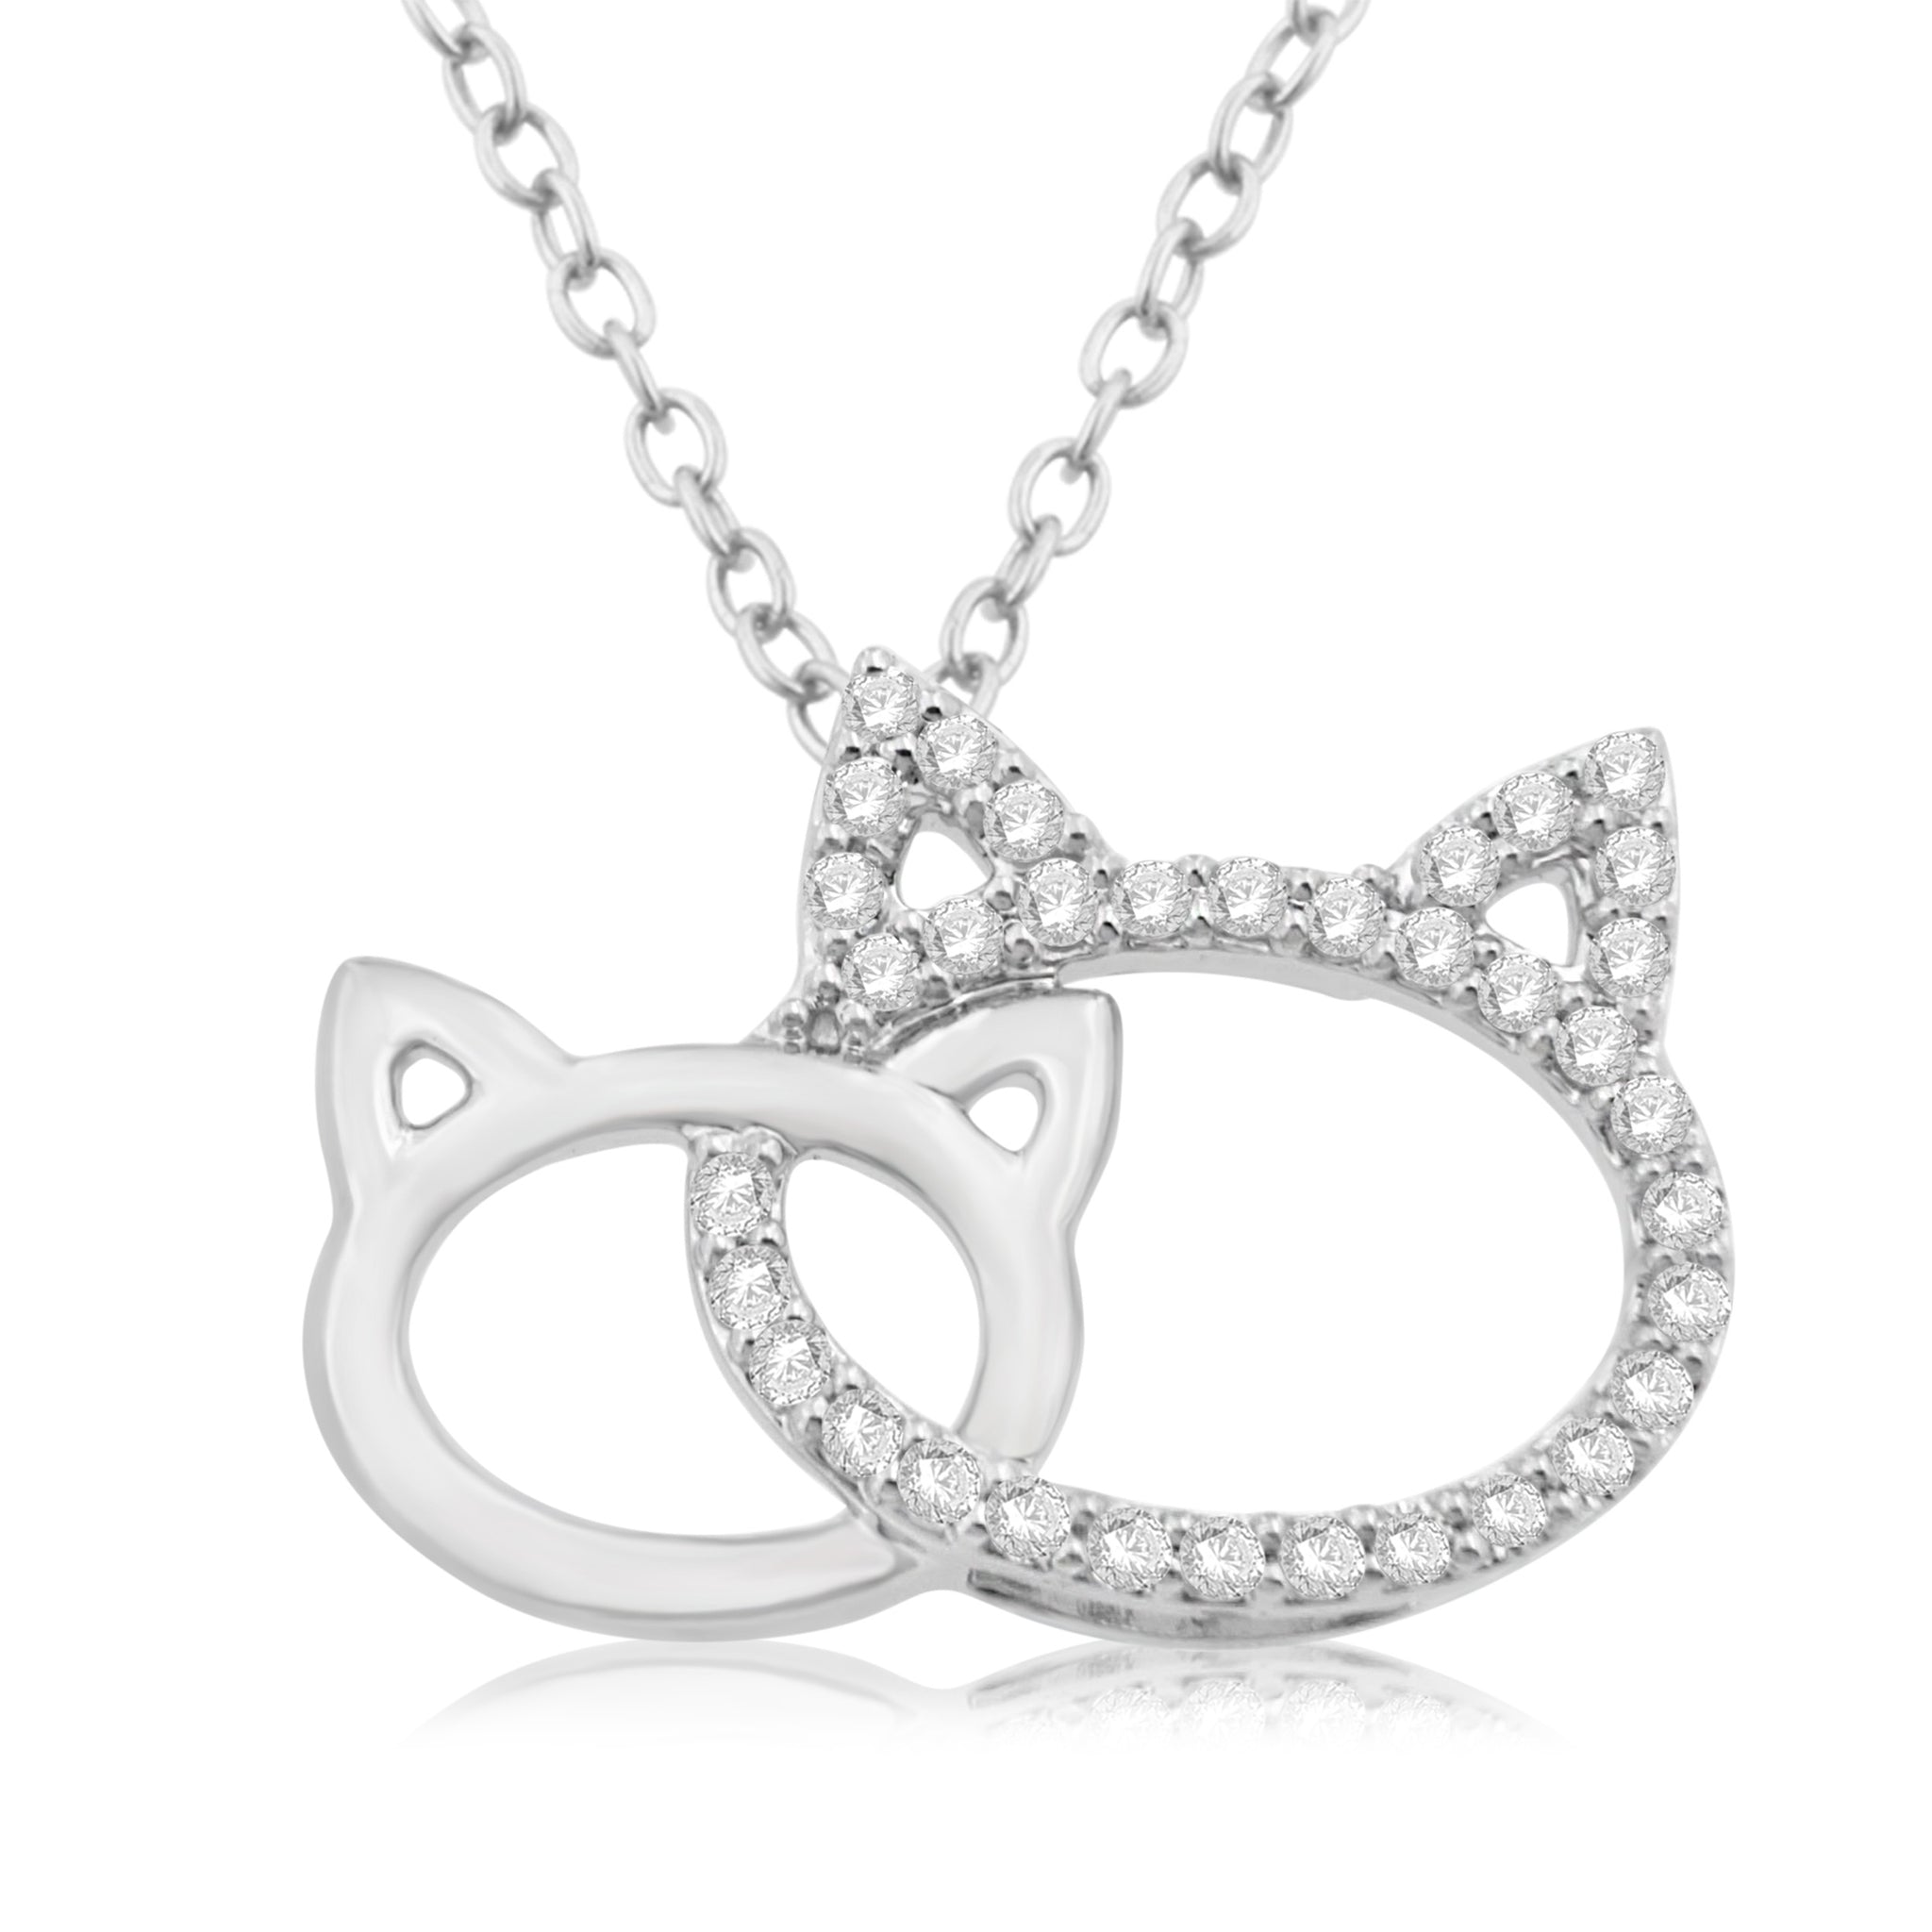 Origami Cat Diamond Necklace by Tache - Nelson Coleman Jewelers